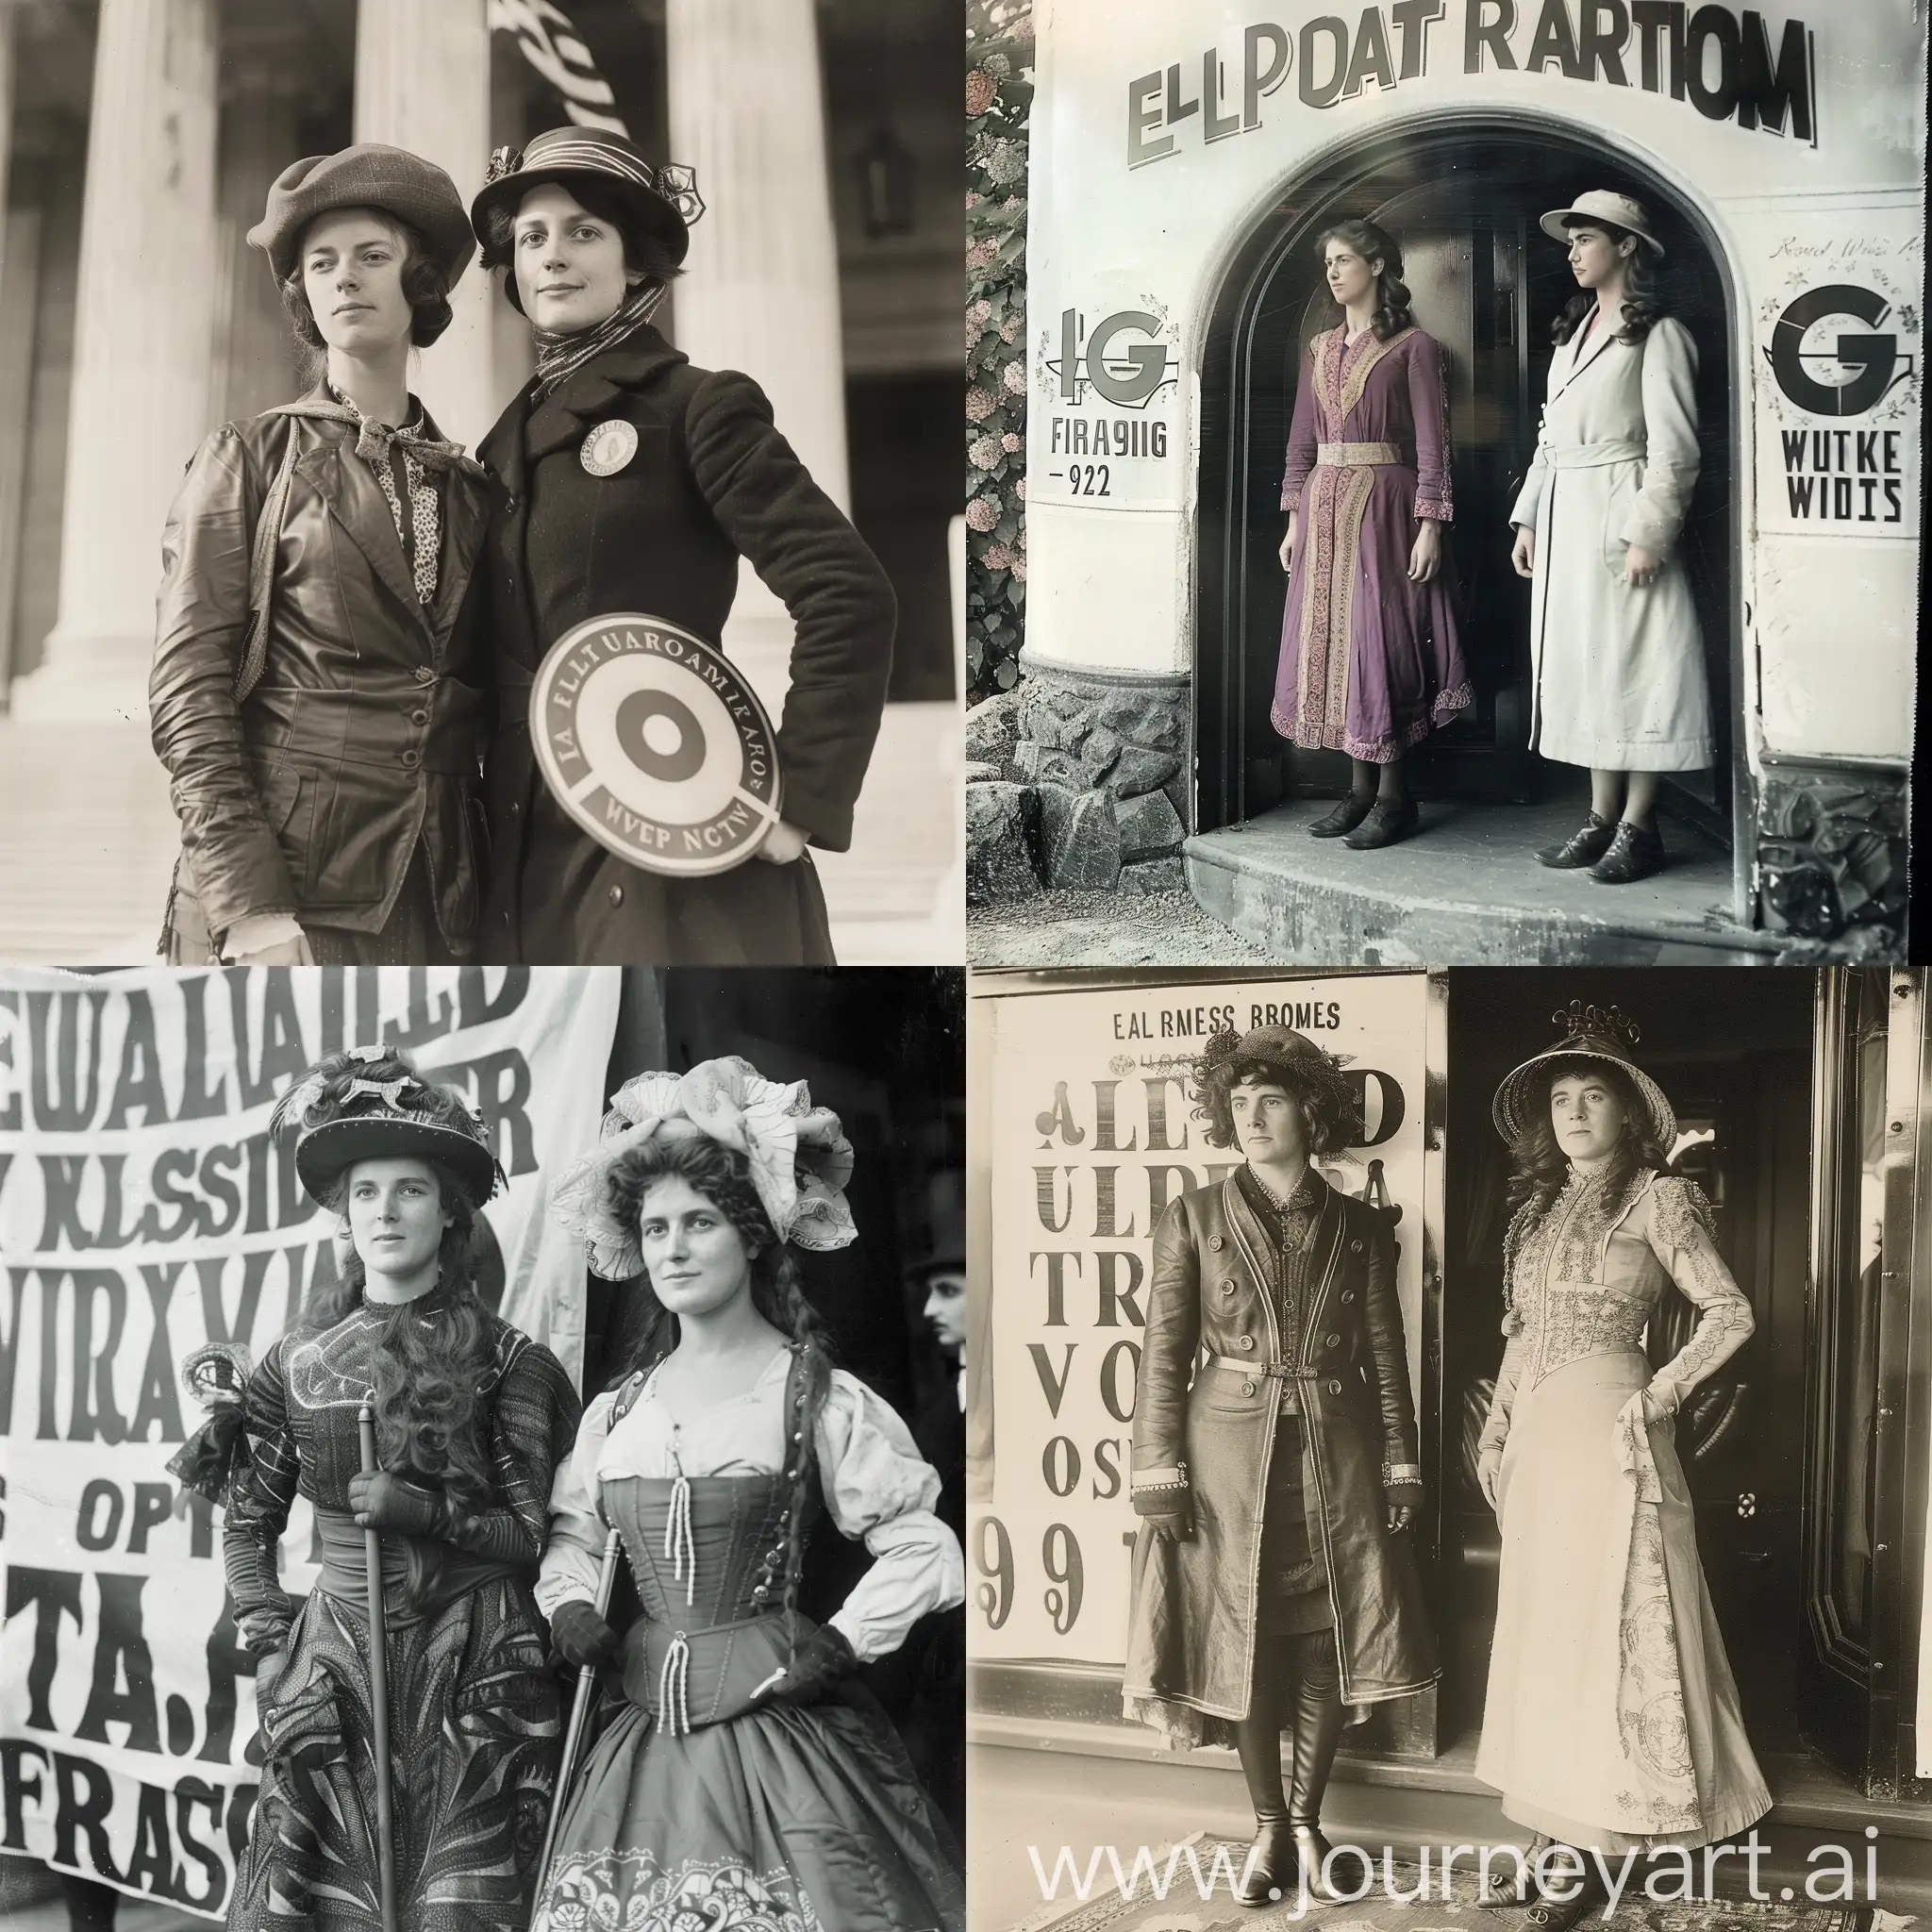 Equal-Rights-for-Women-in-1922-Suffragettes-Gathering